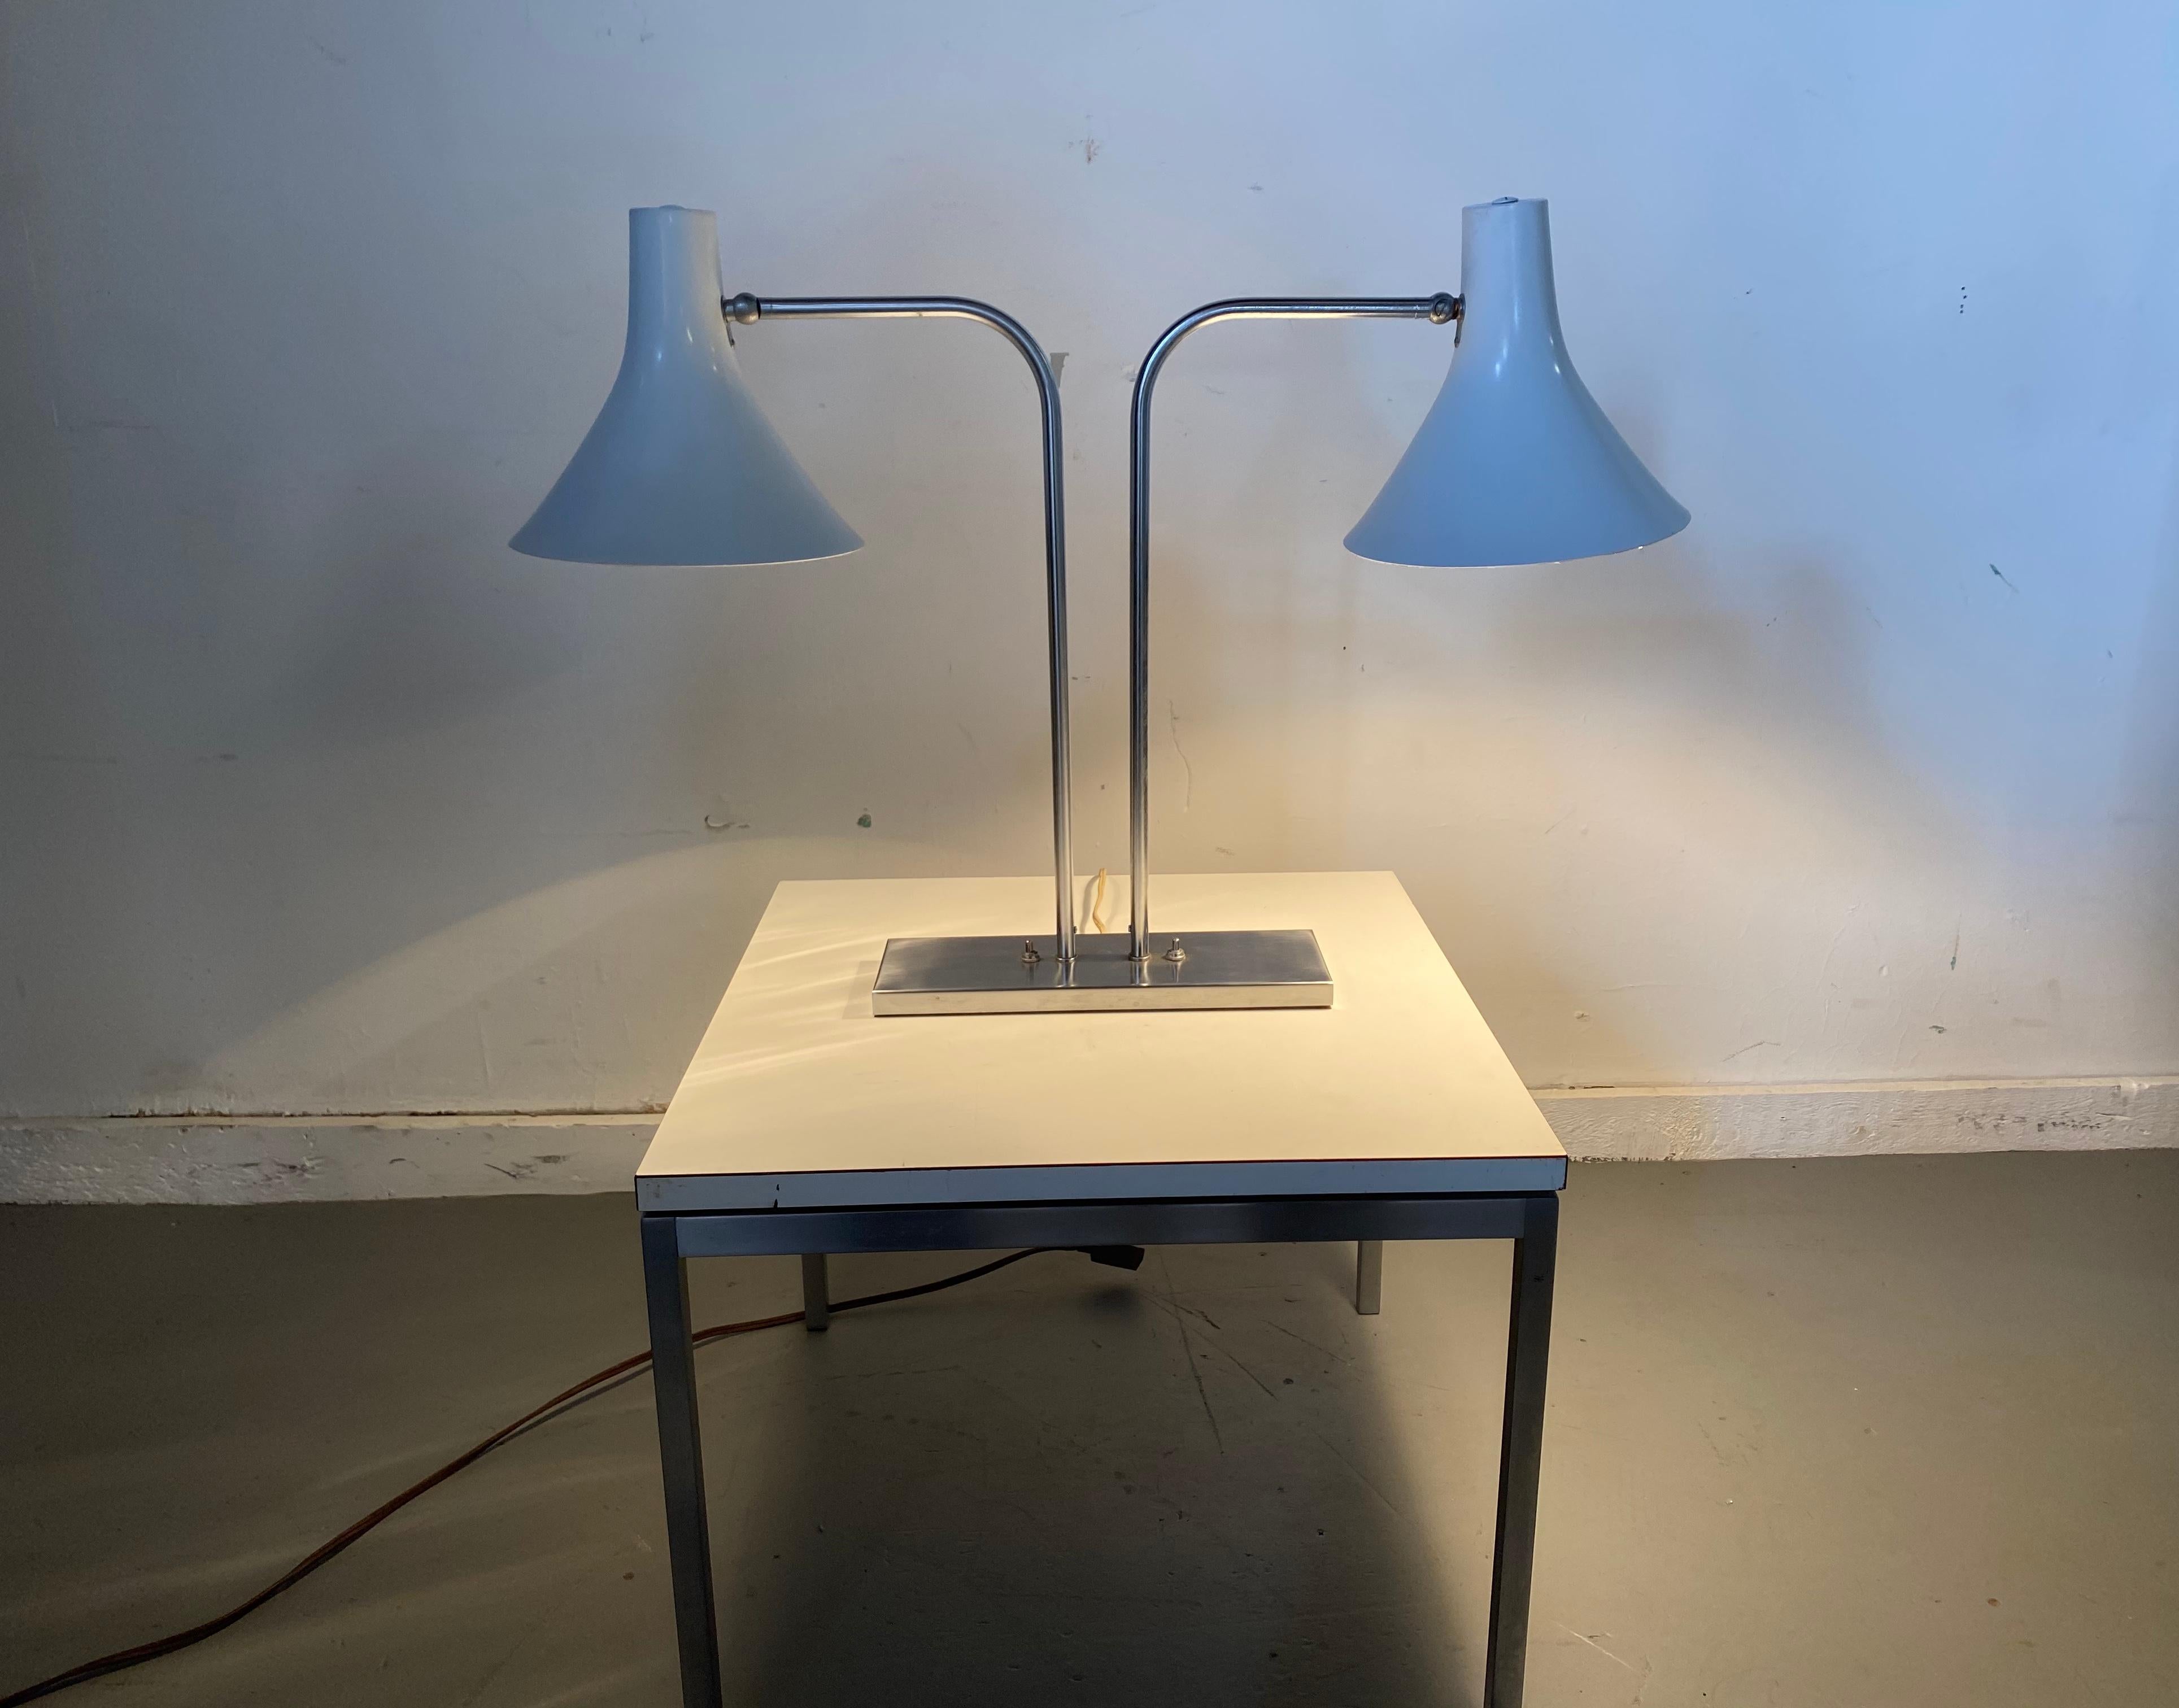 Iconic desk lamp with pivot and swivel cone shades designed by Greta Von Nessen for Nessen Studios. Lamp is constructed with brushed nickel with lacquered shades. Amazing original condition.